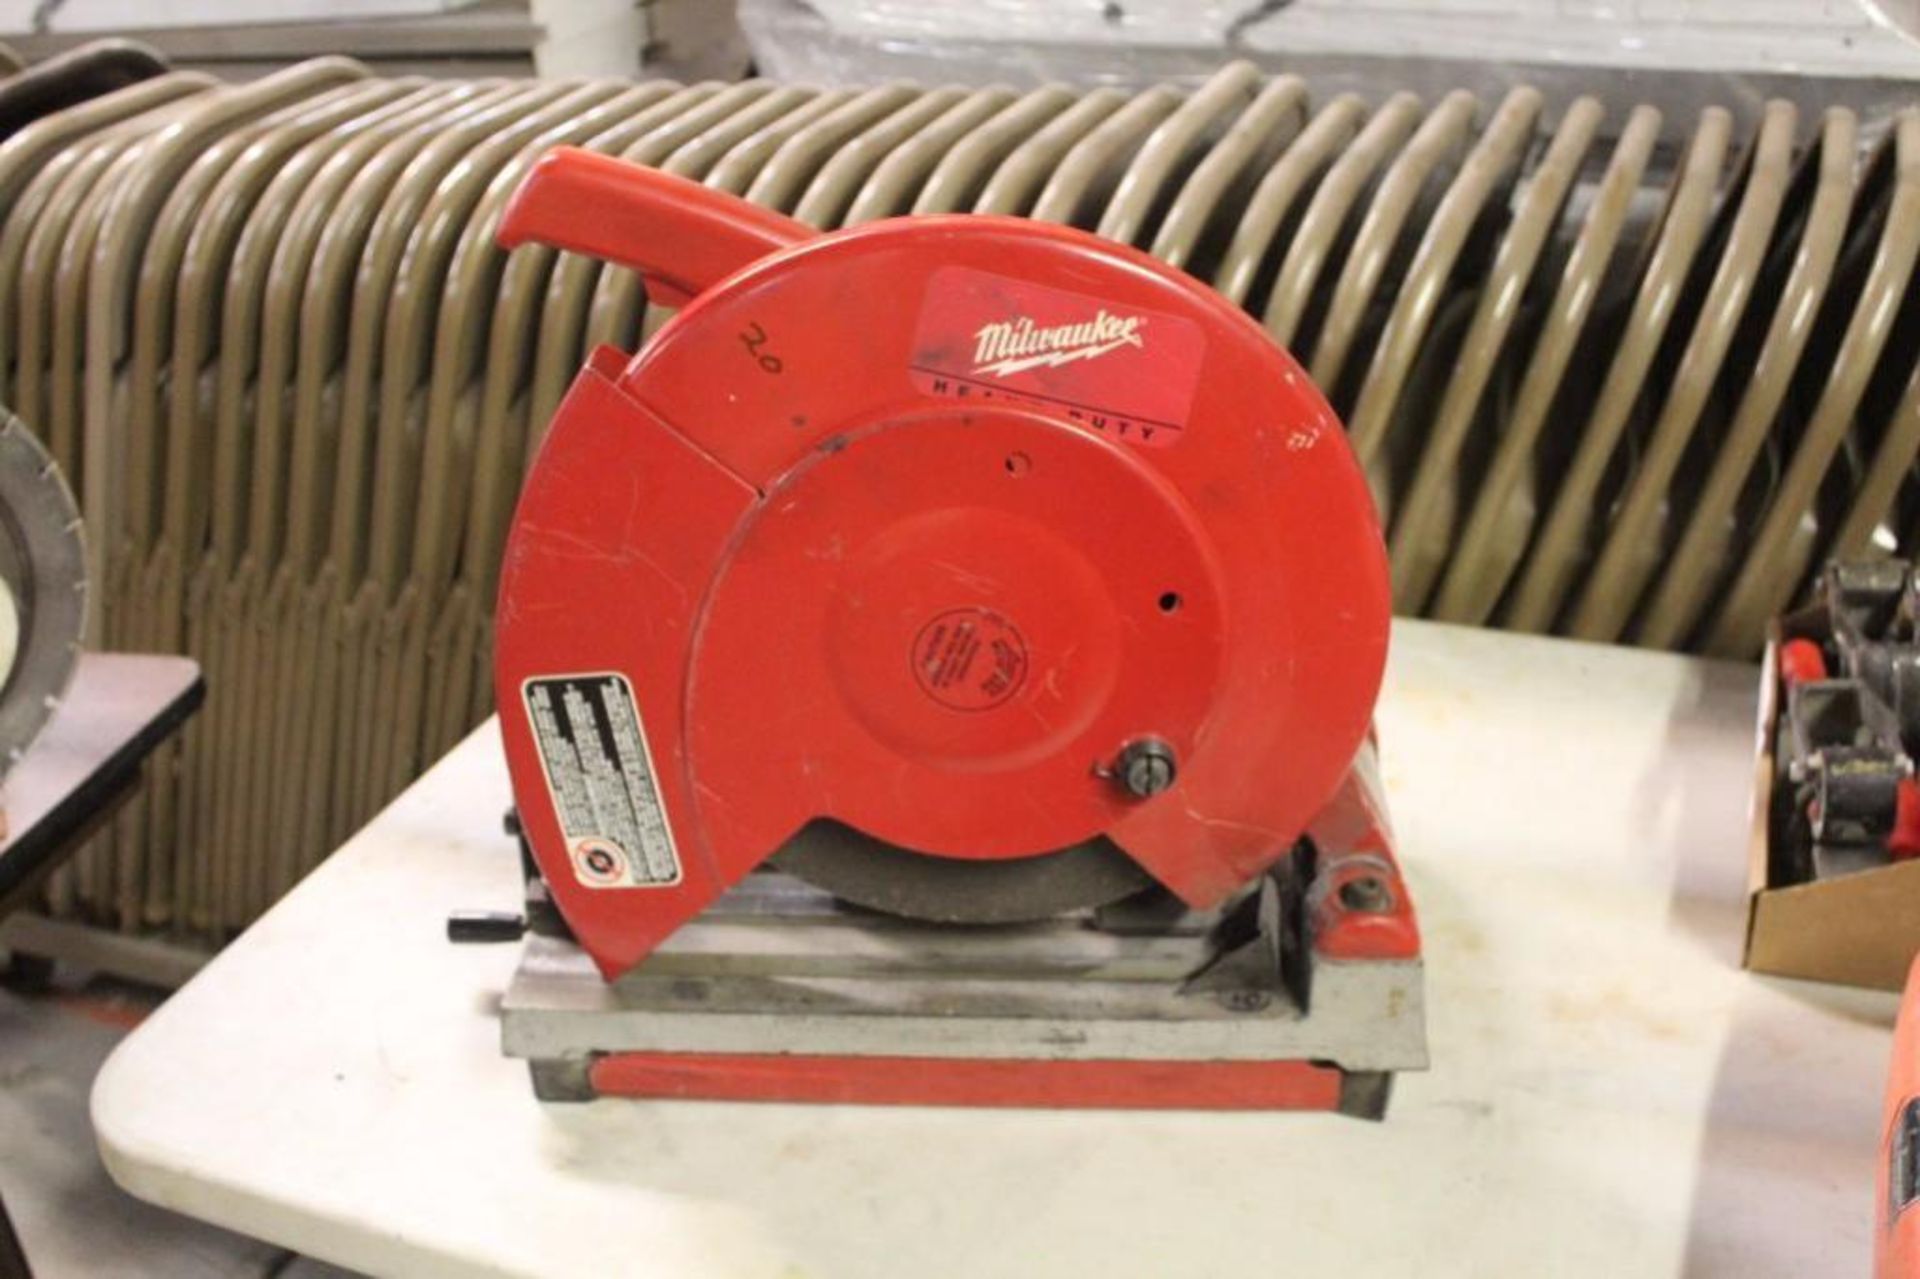 Milwaukee 14-inch abrasive cut-off saw Catalog number 6176 - 20